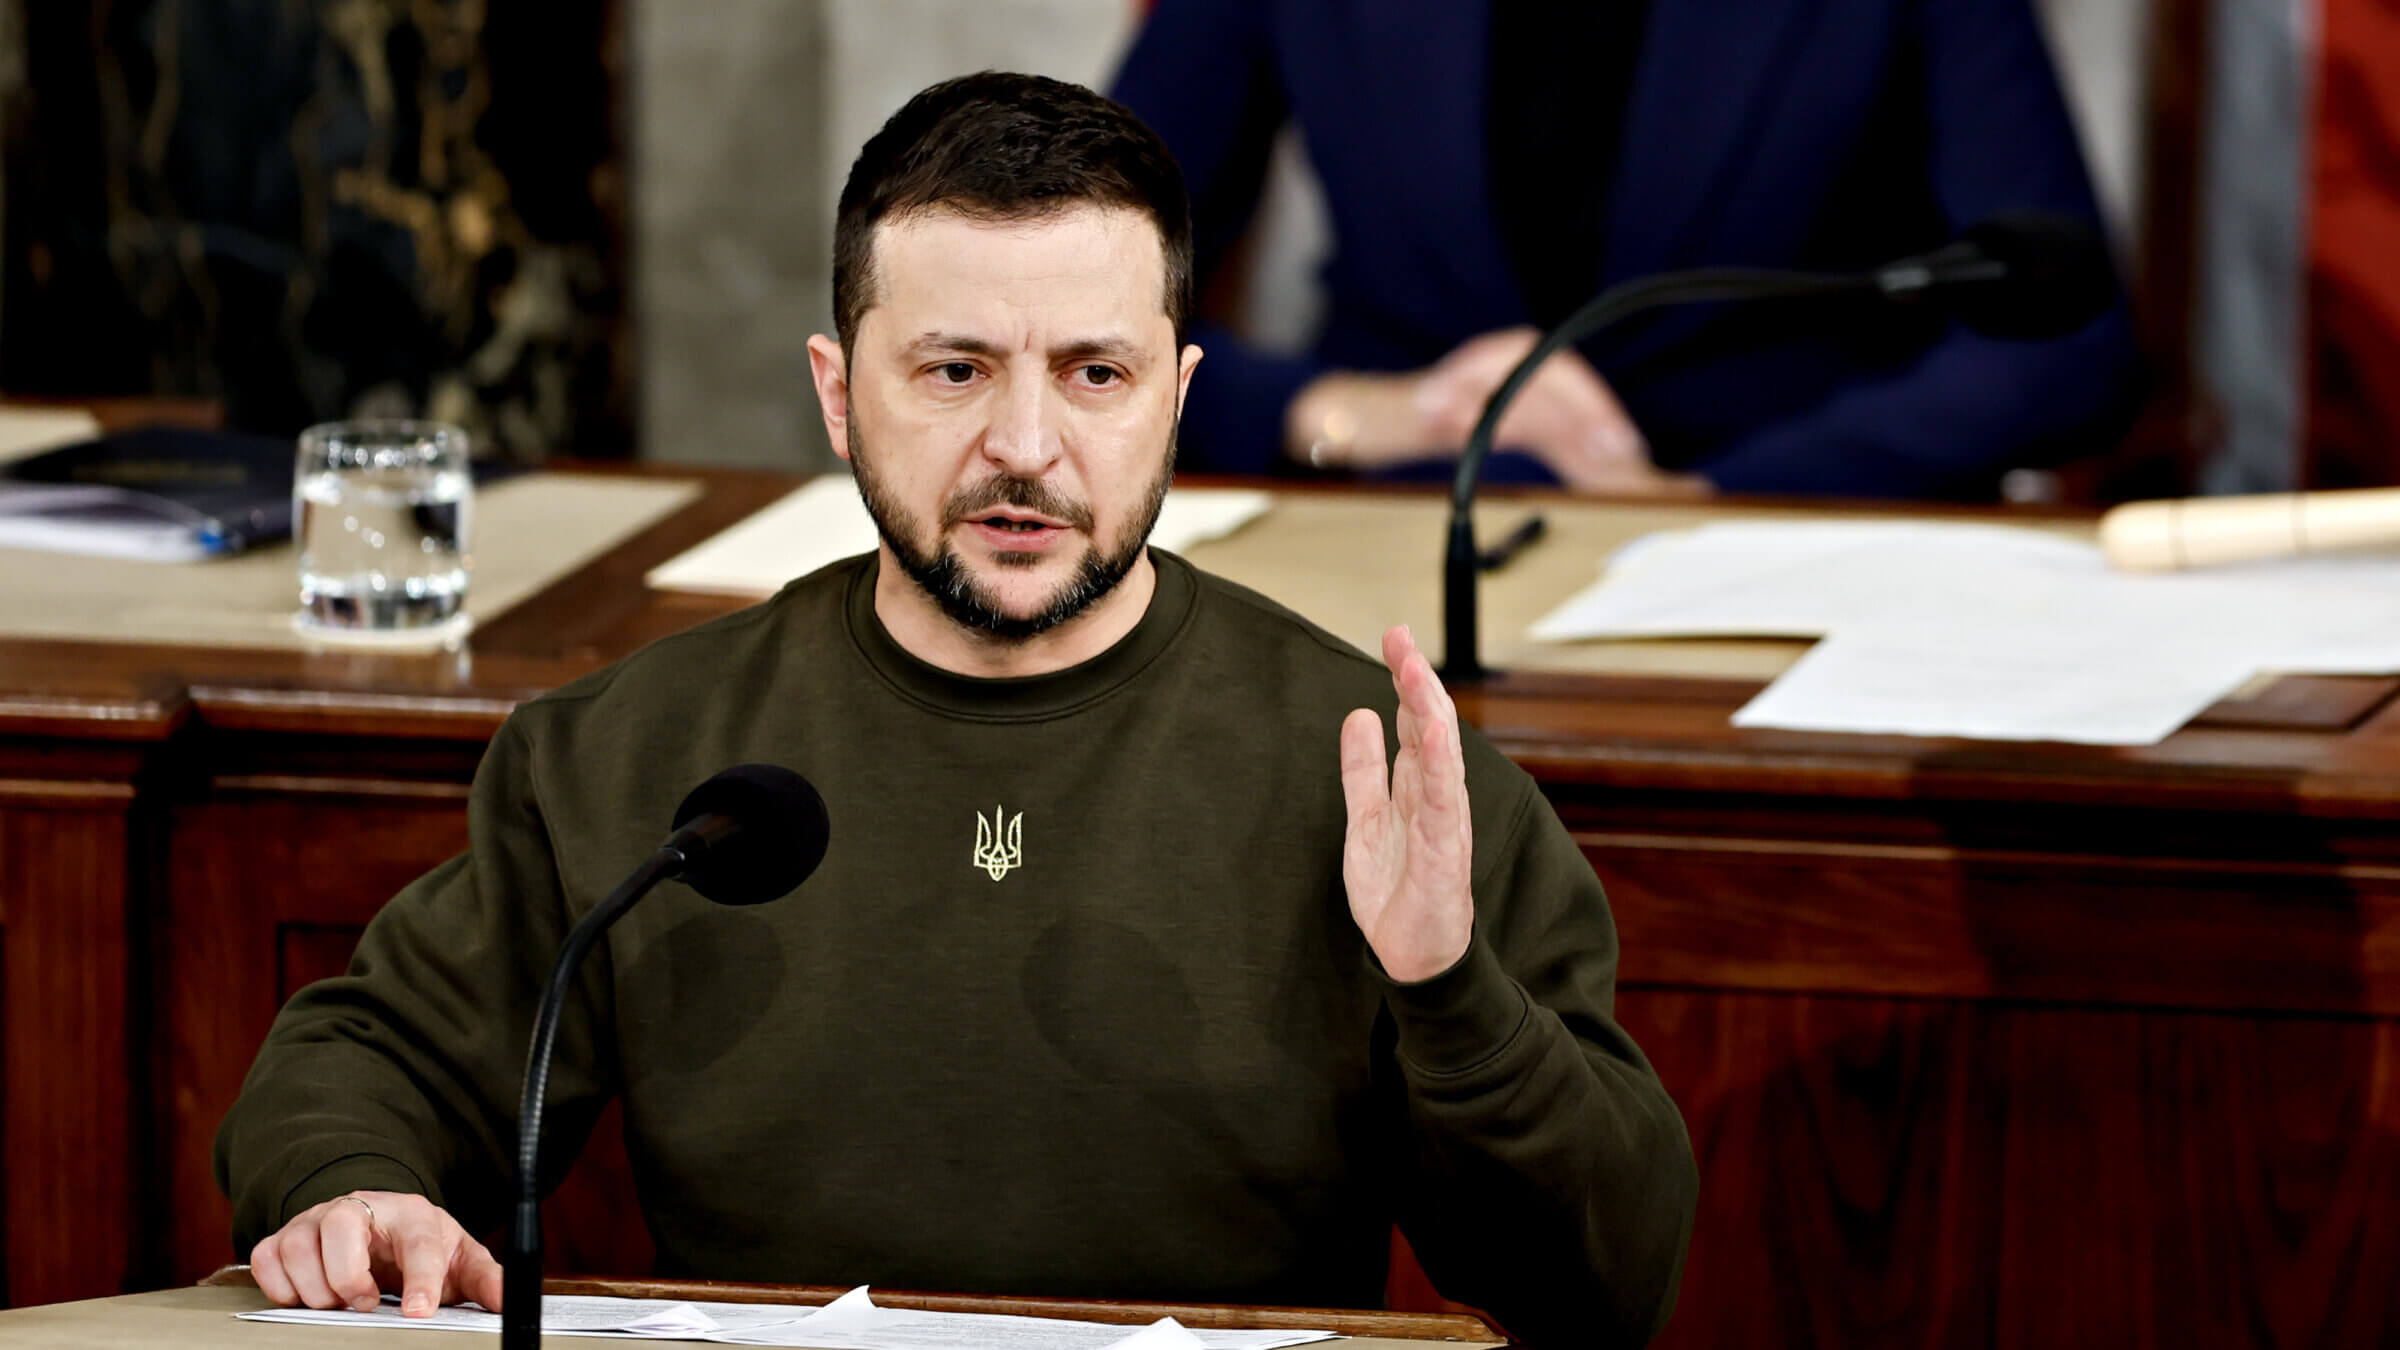 Volodymyr Zelenskyy, speaks during a joint meeting of Congress at the US Capitol.